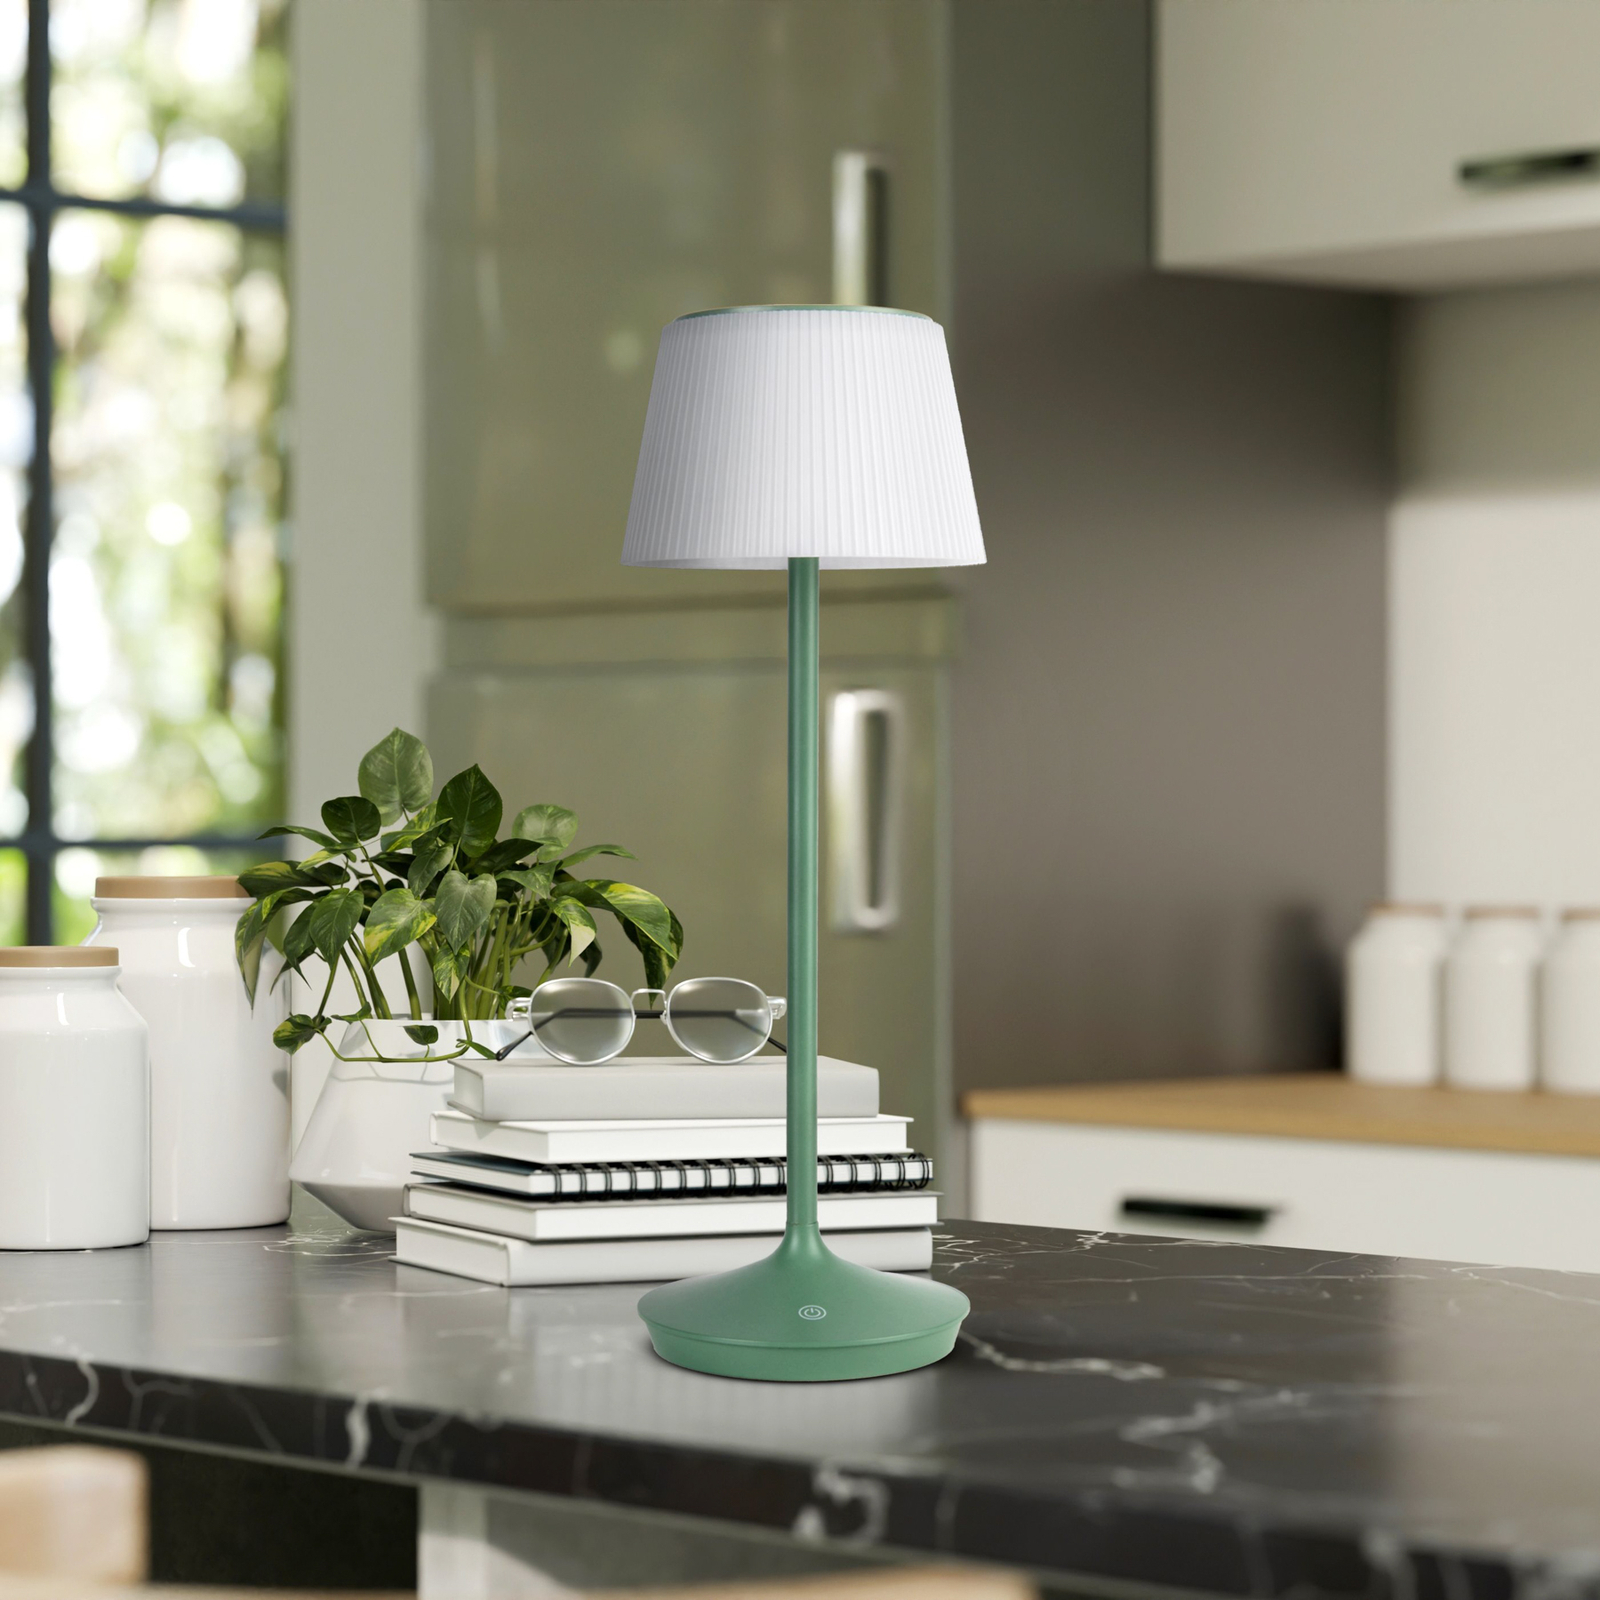 Lampe table solaire LED Emmi CCT recharge, verte